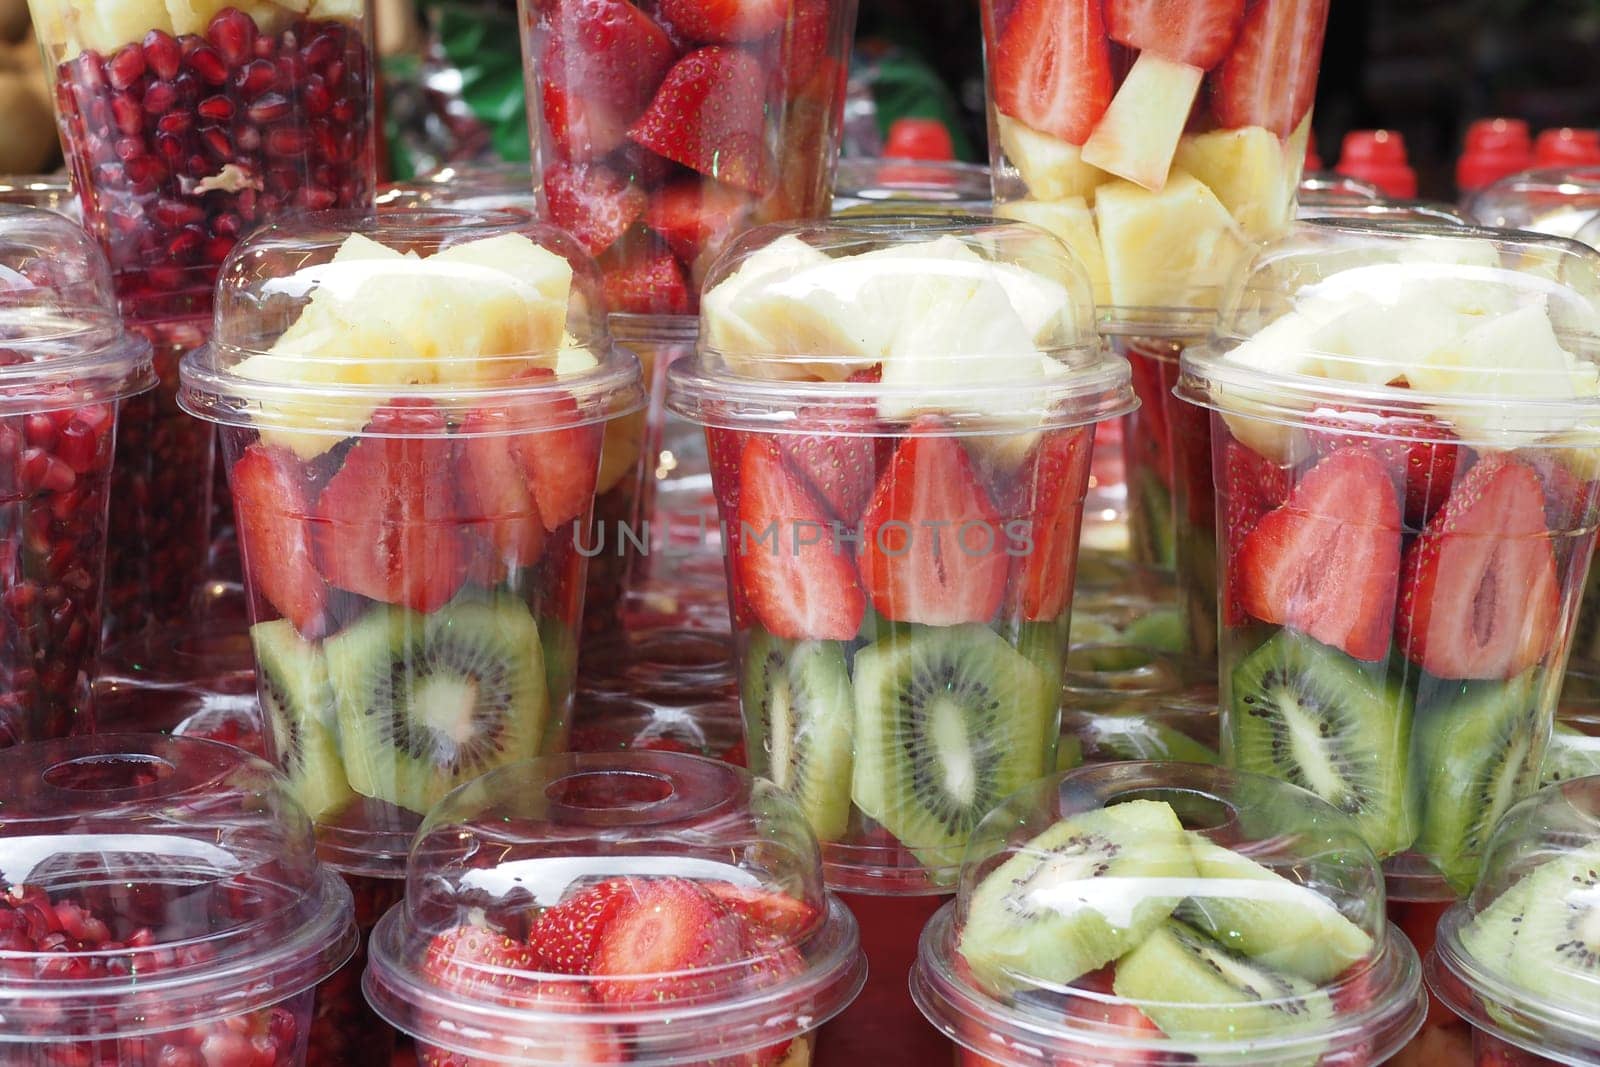 pineapple, kiwi and Strawberries in. plastic container selling at shop by towfiq007